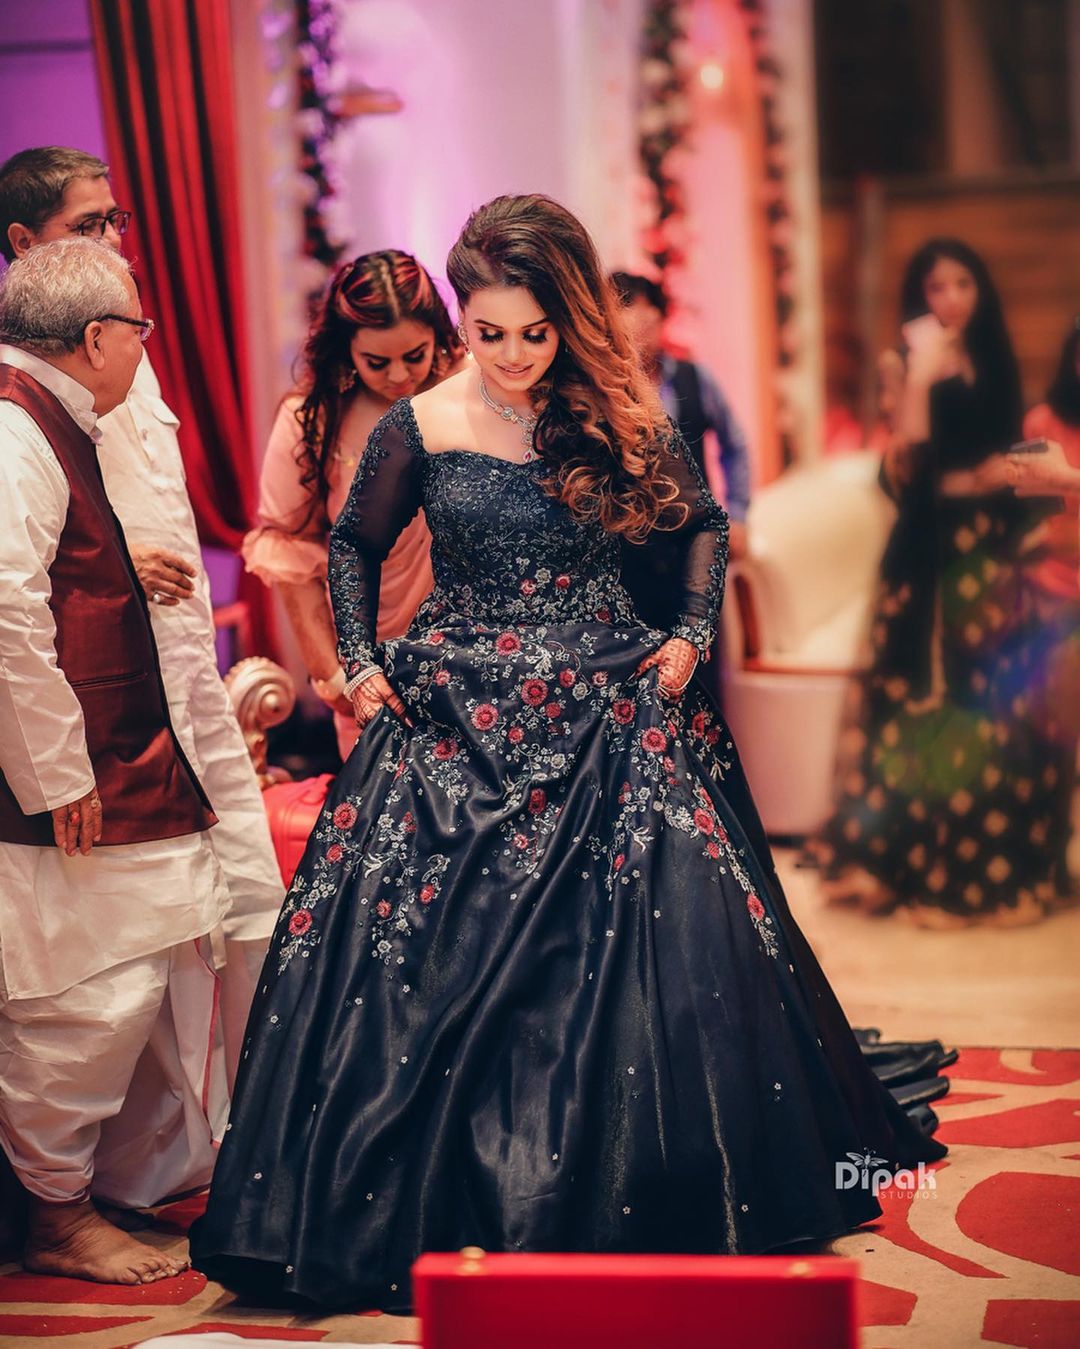 7 Most Stunning Outfits For The Engagement Ceremony